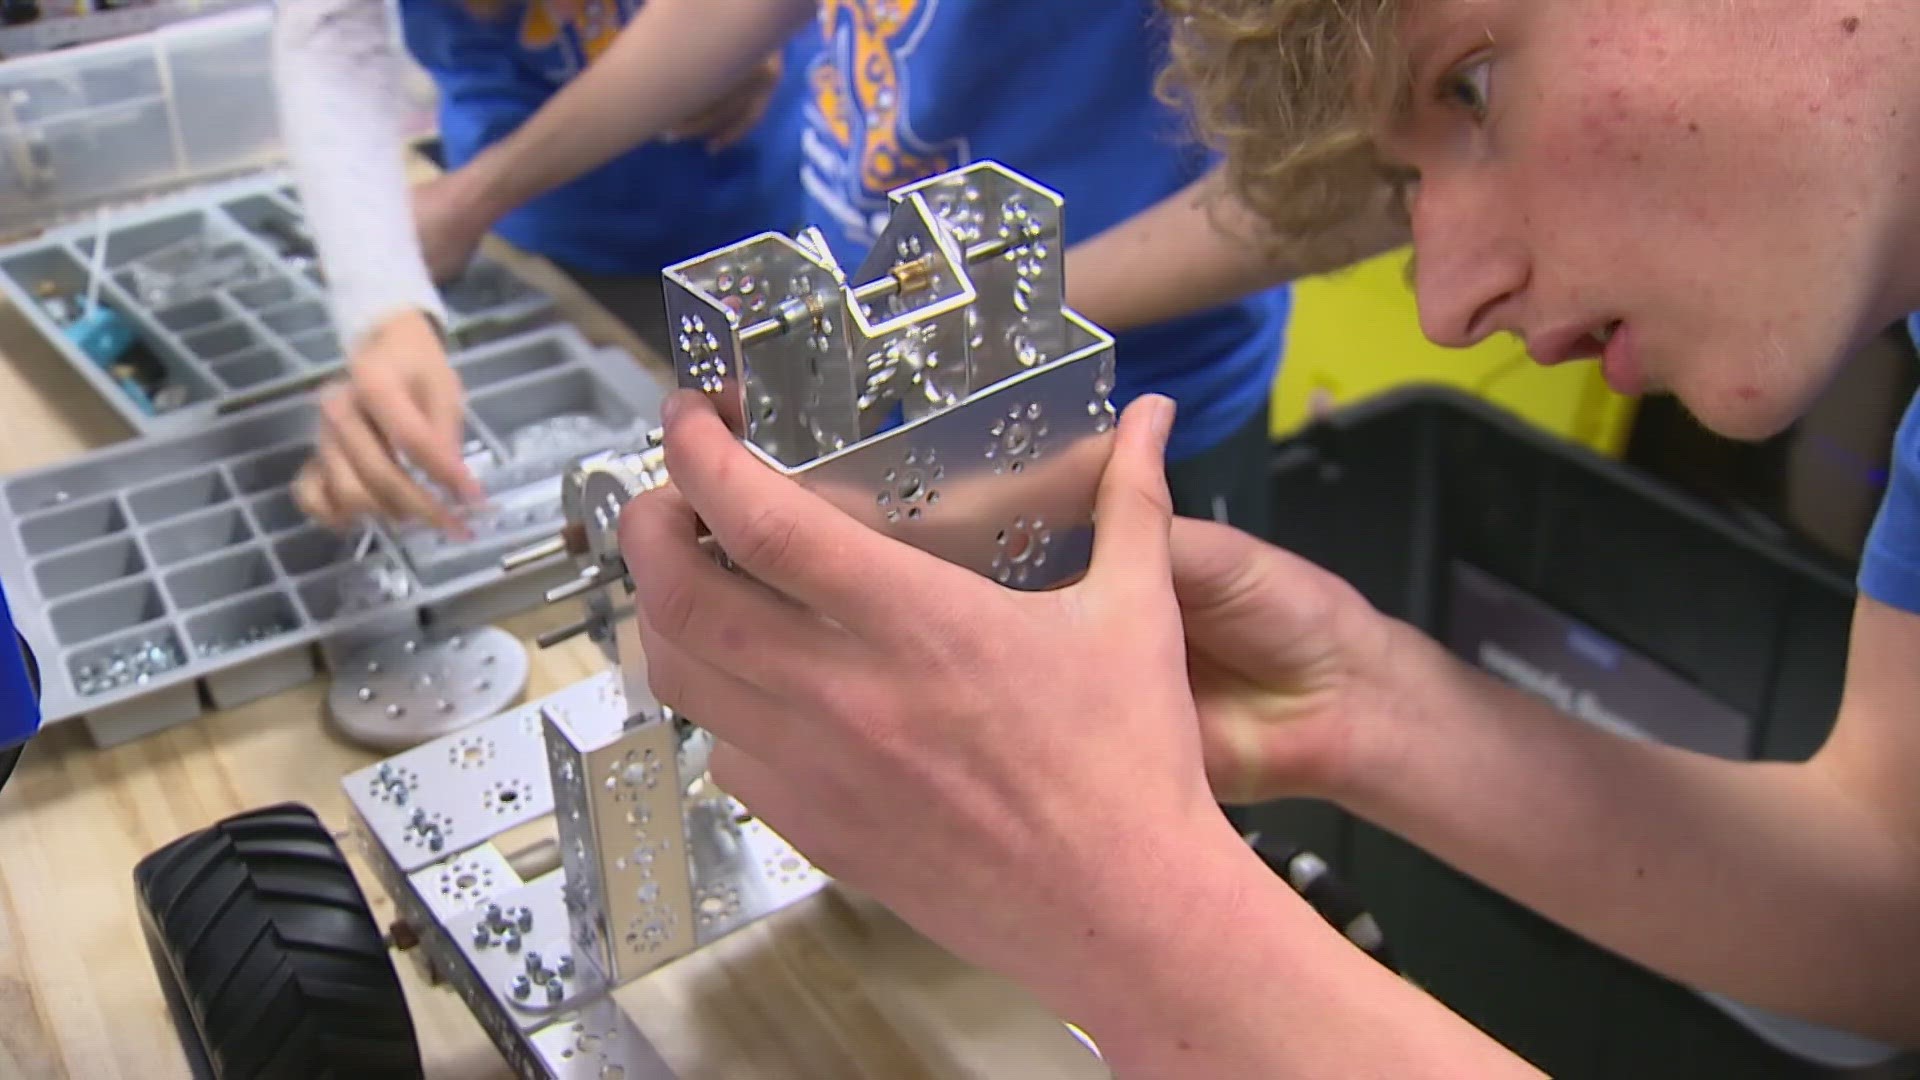 The state champion robotics team from Rochester High School may have to compete at nationals without their winning robot.